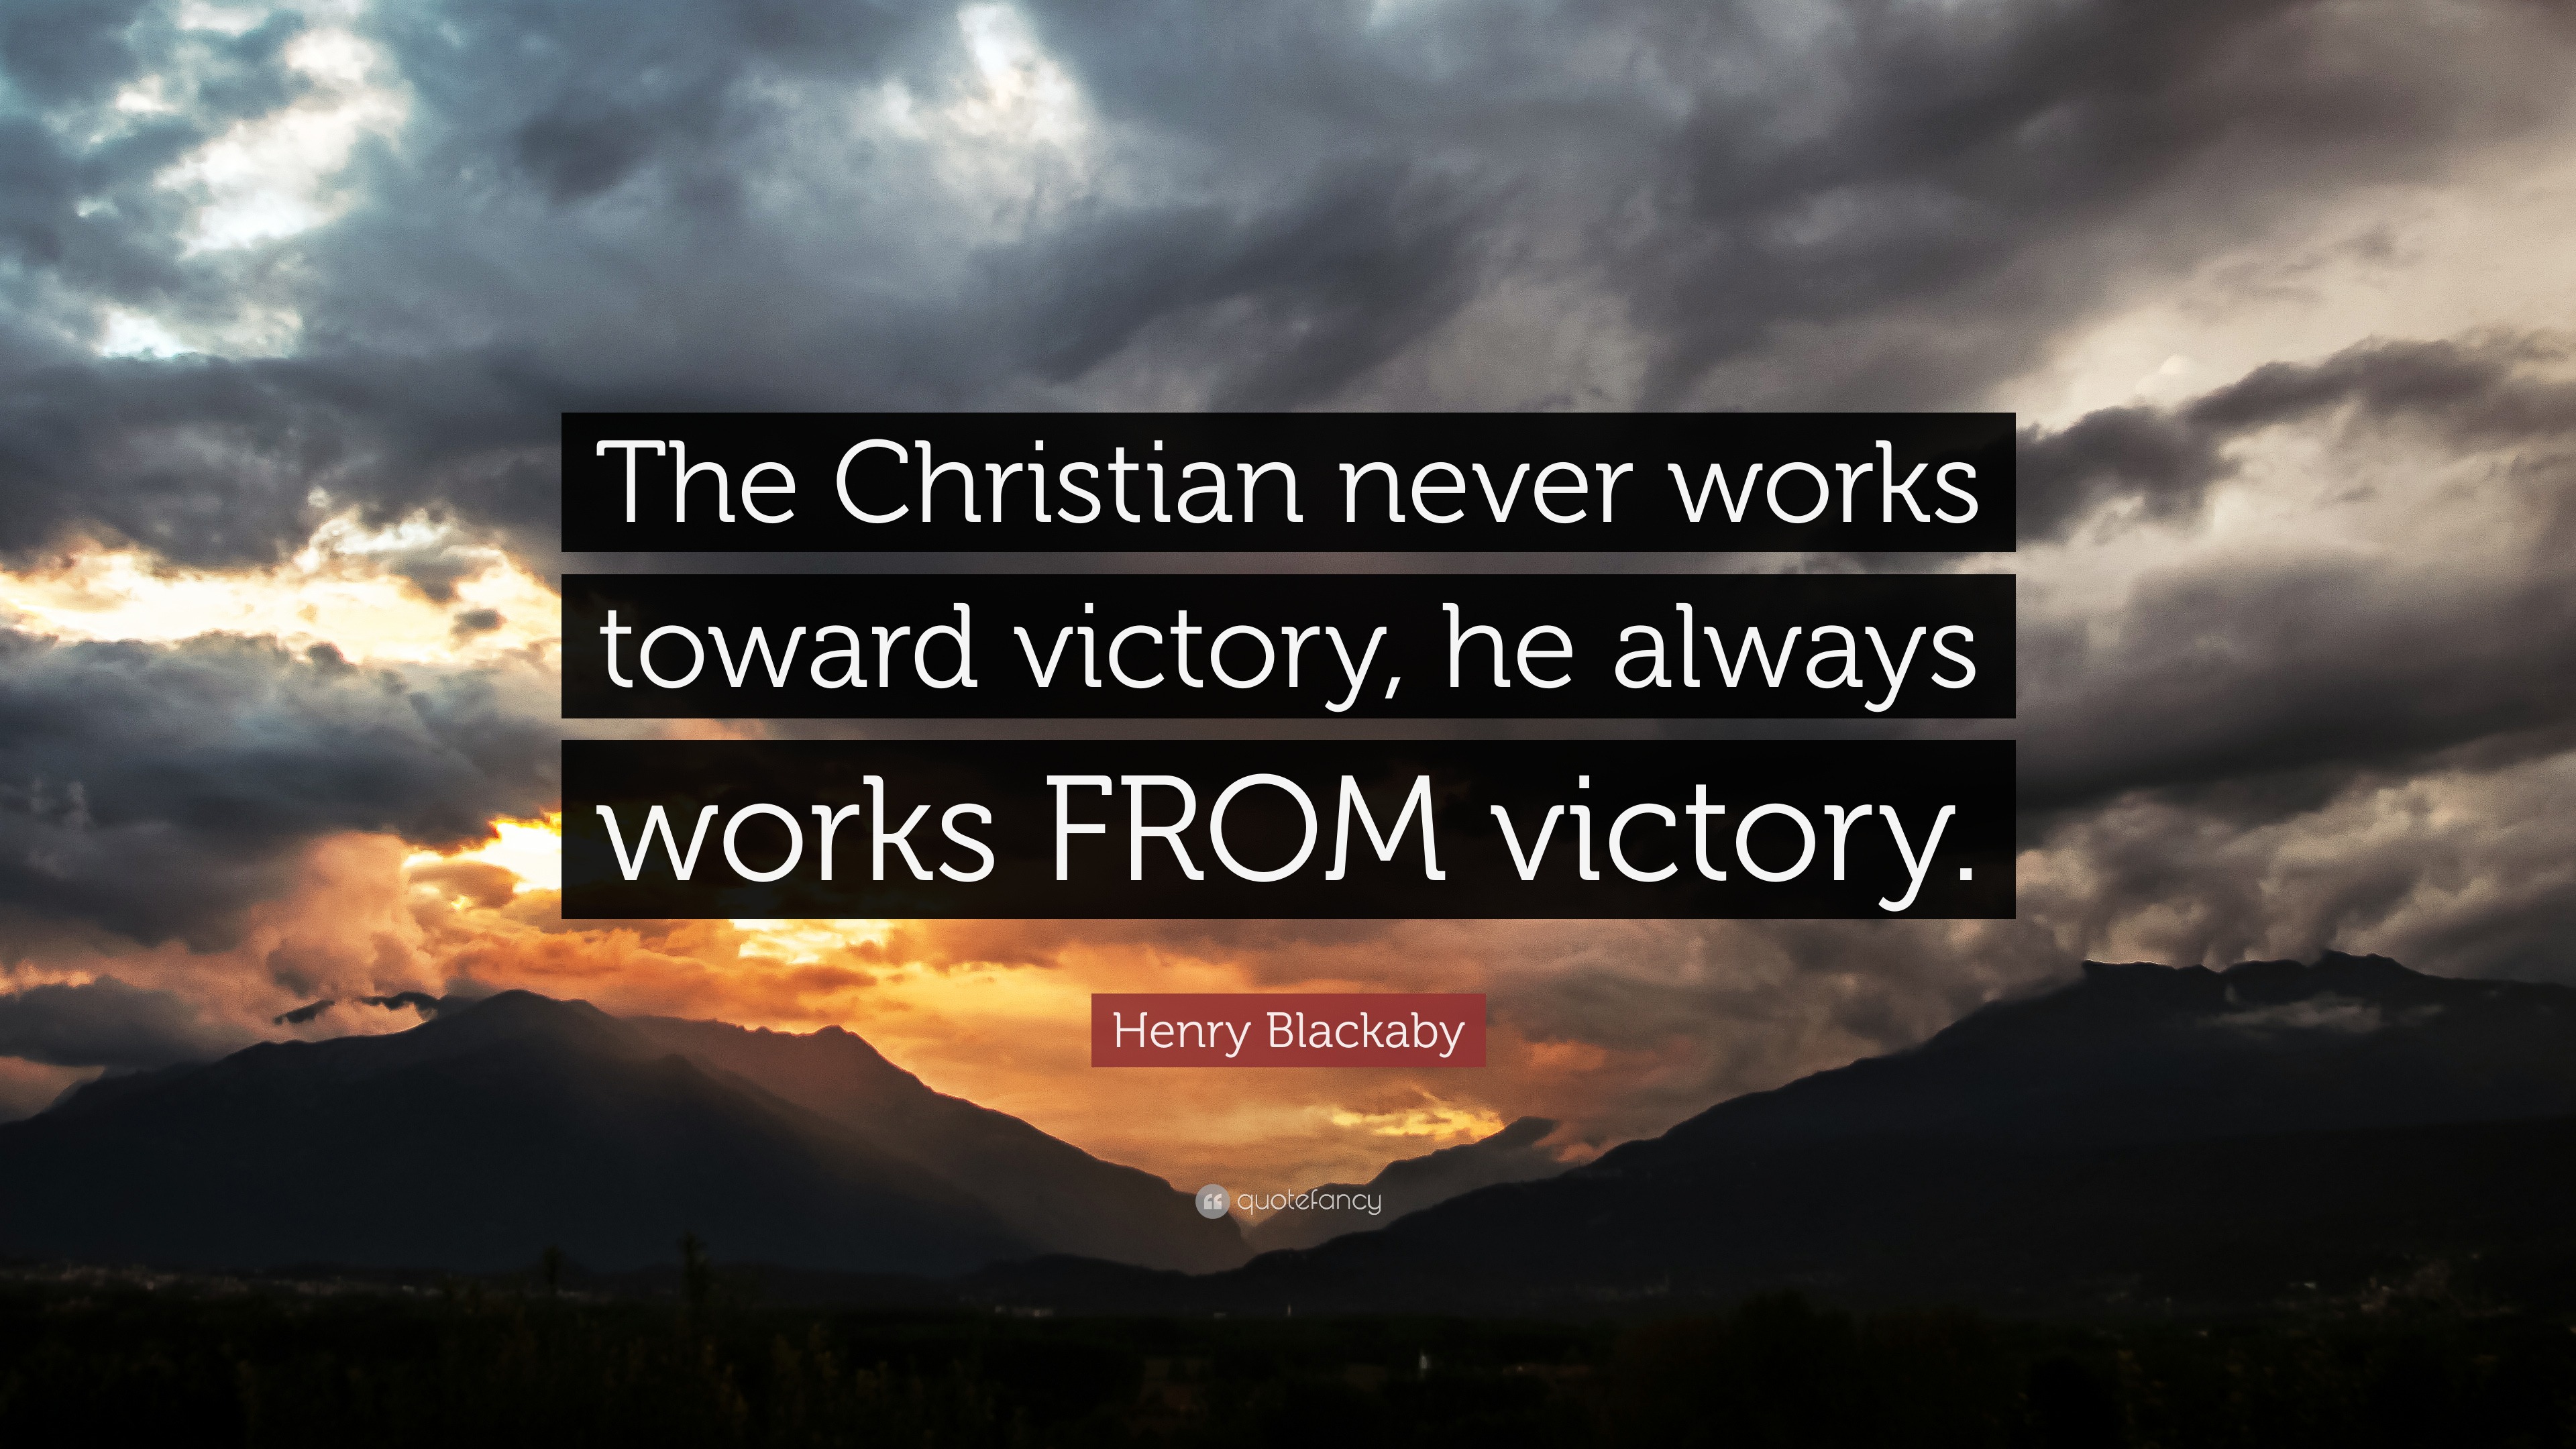 Henry Blackaby Quote “The Christian never works toward